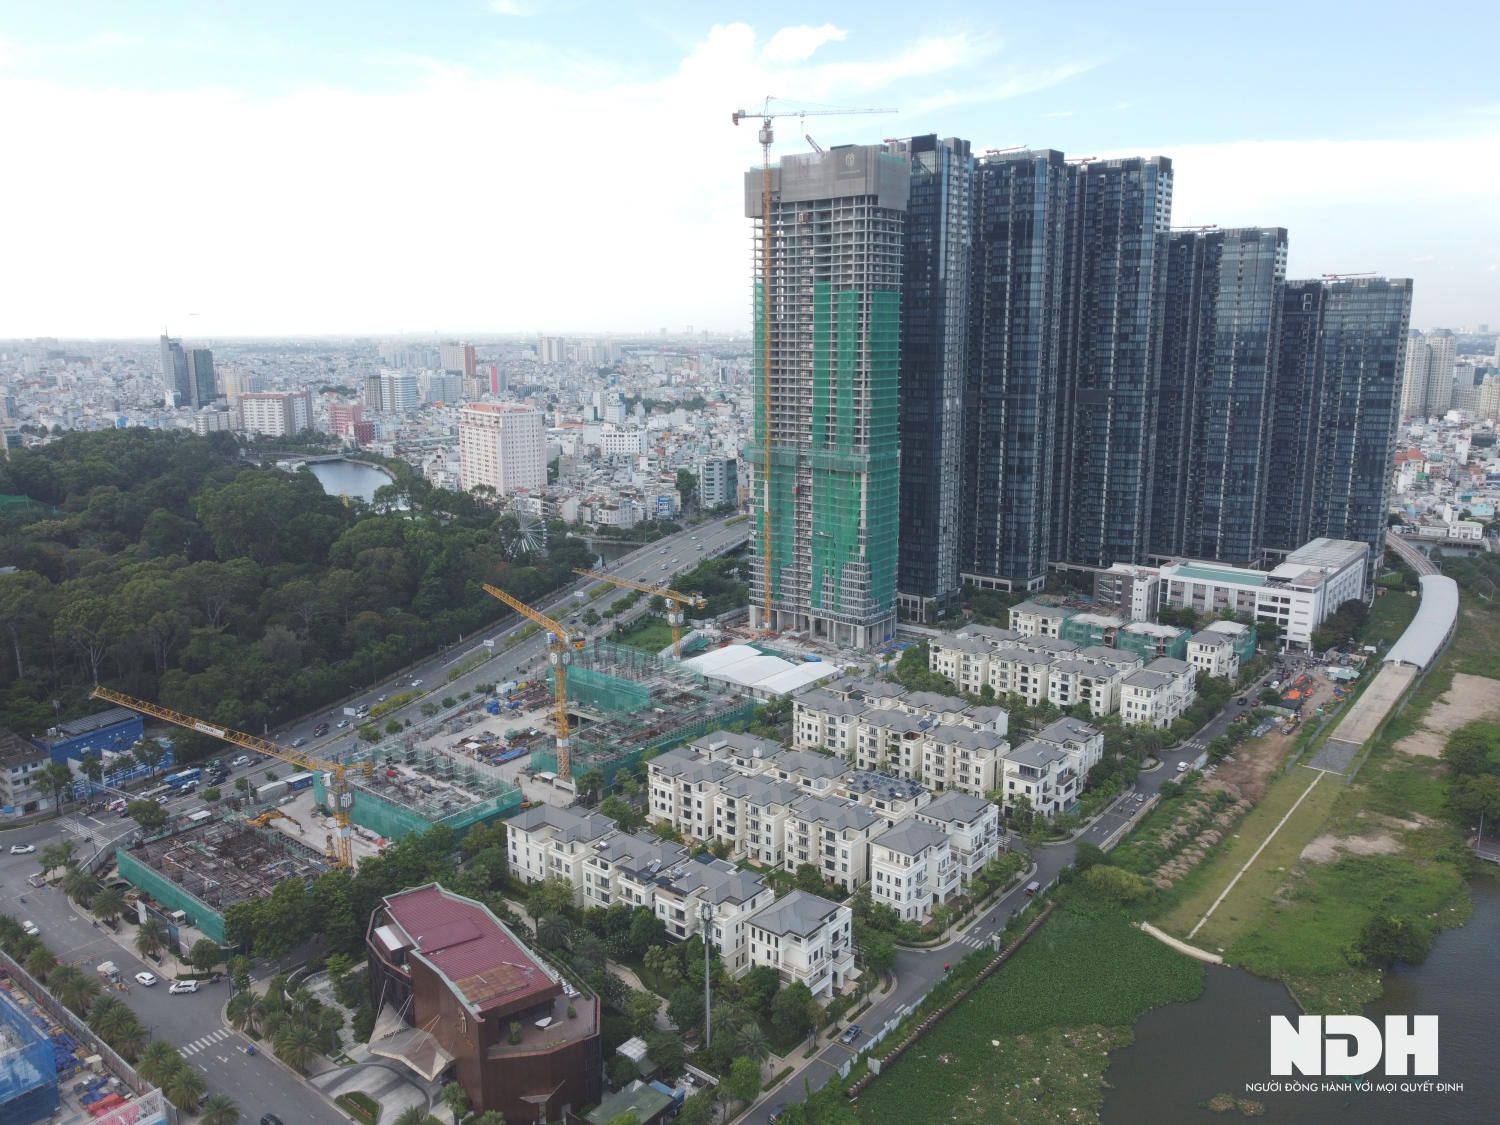 But how is the luxury apartment project developing in Ho Chi Minh City after changing owners?